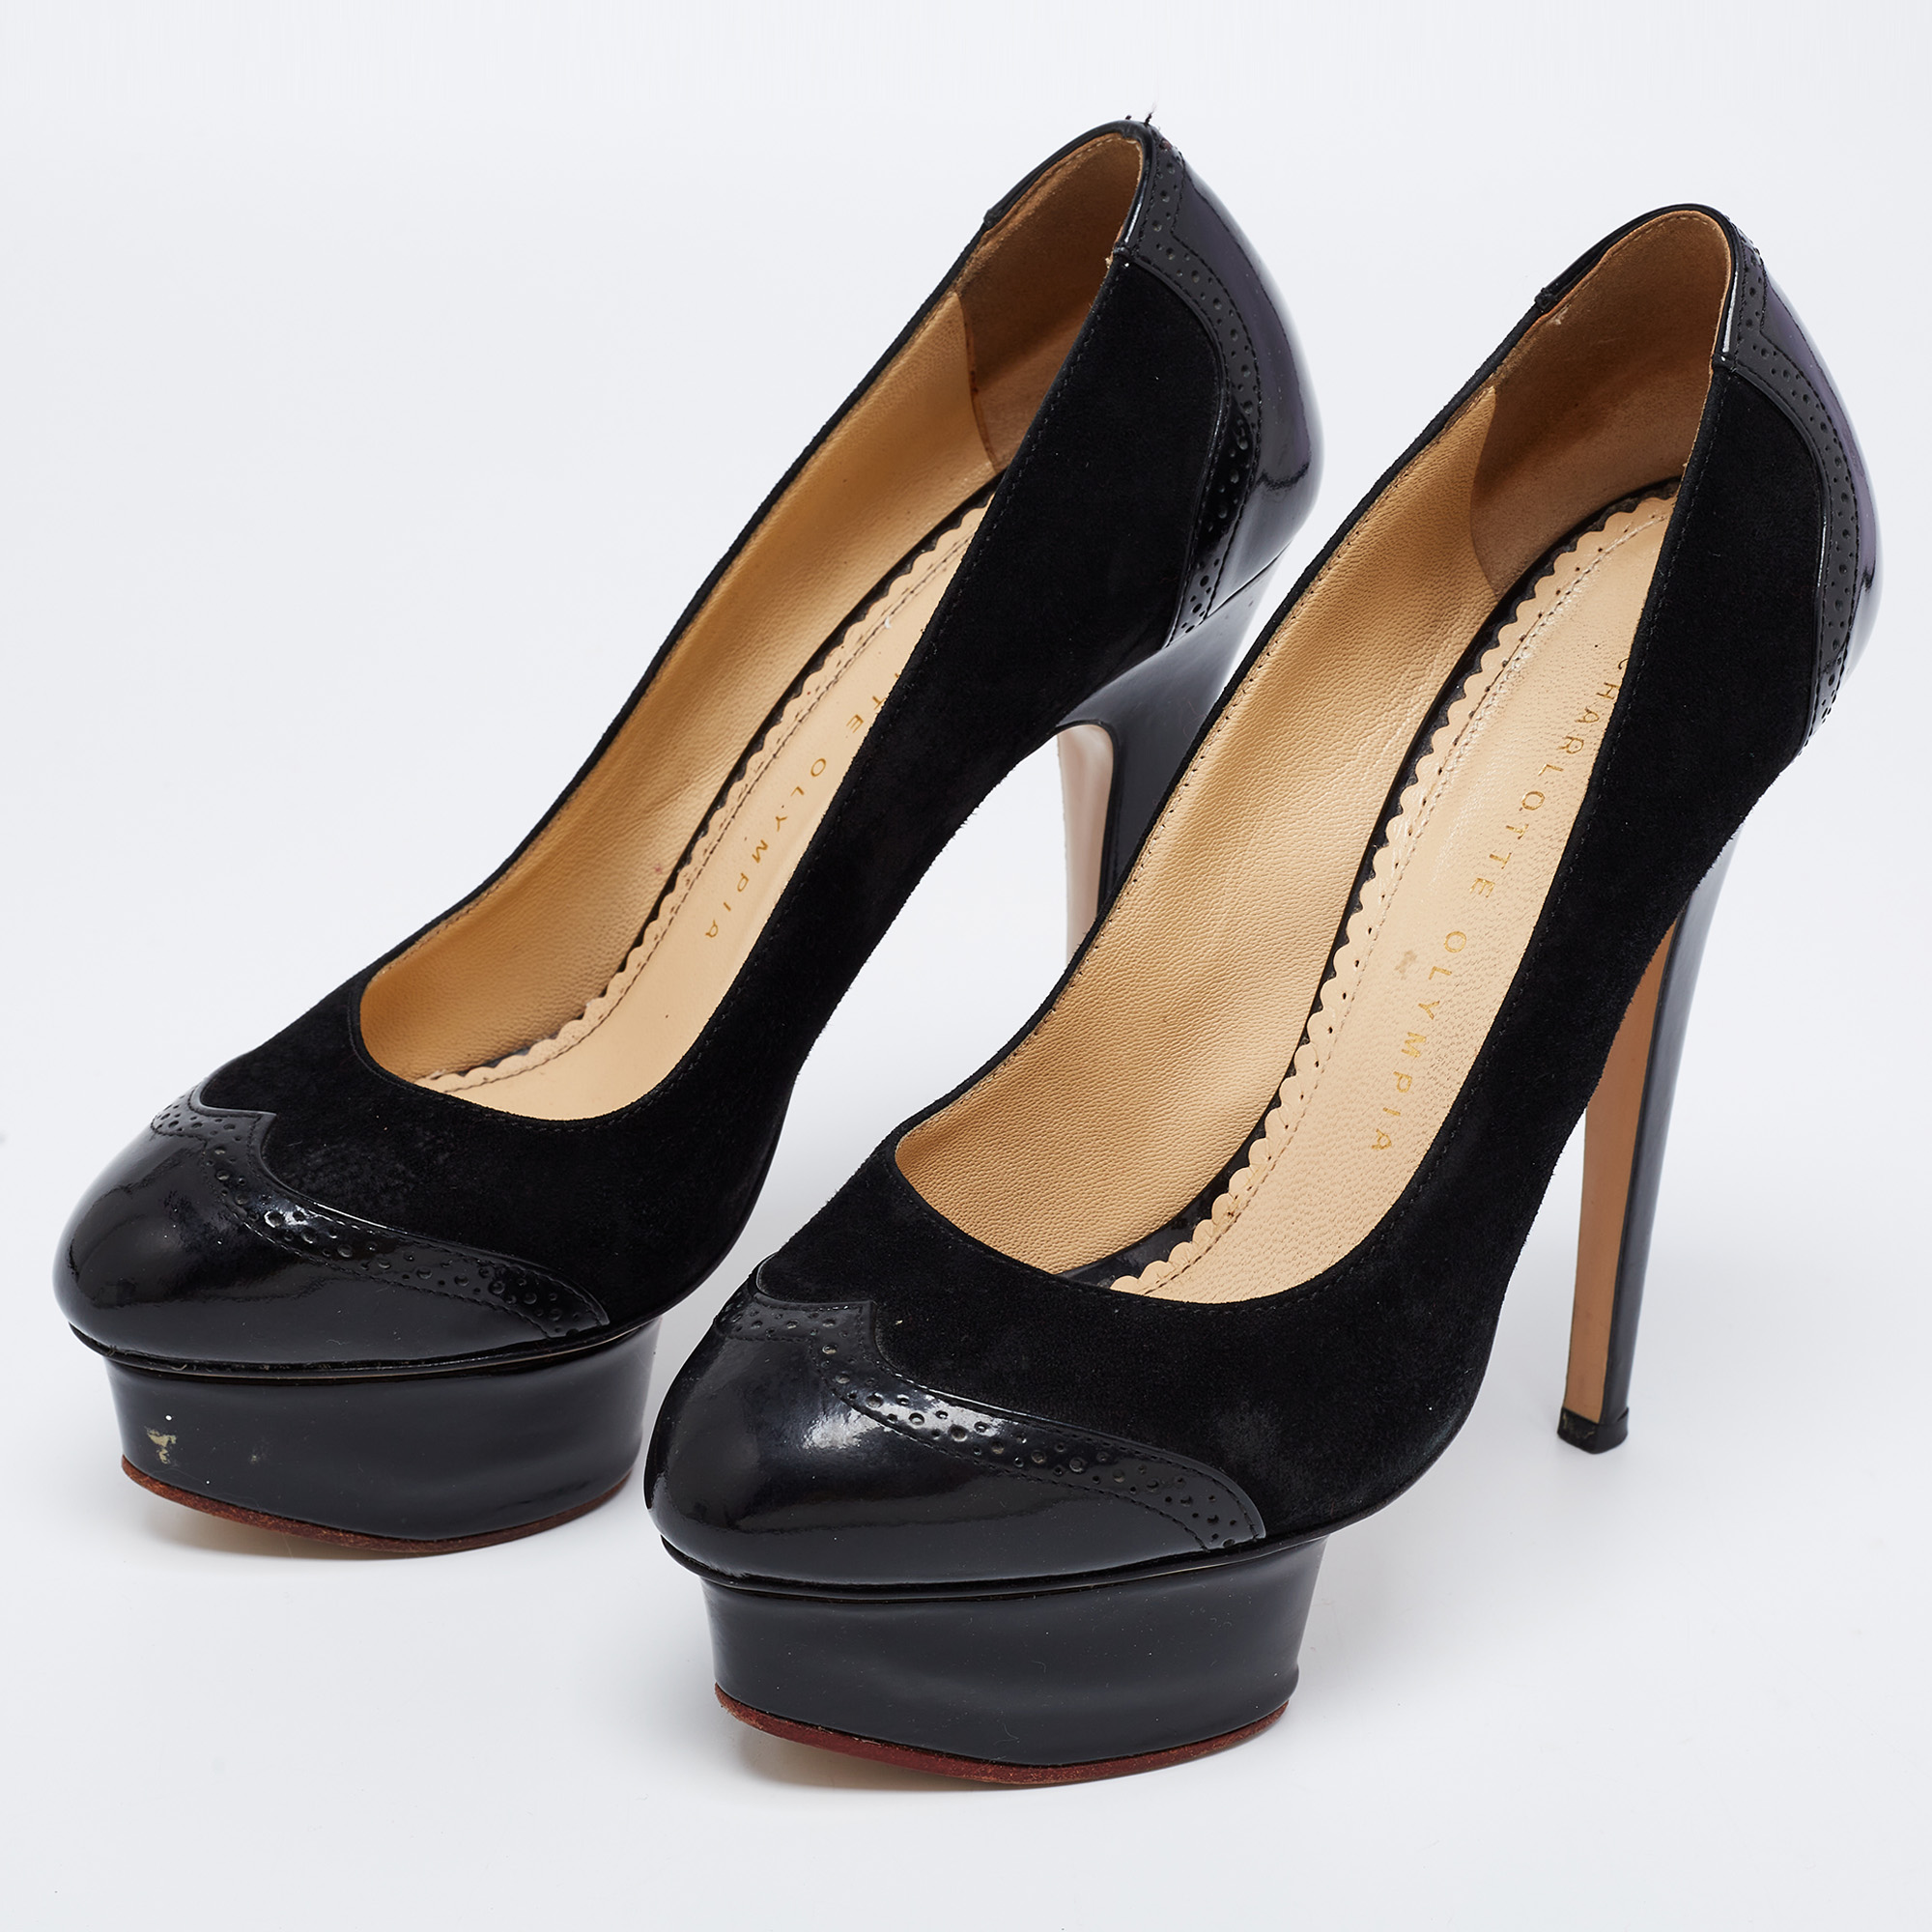 

Charlotte Olympia Black Suede And Patent Leather Dolly Platform Pumps Size